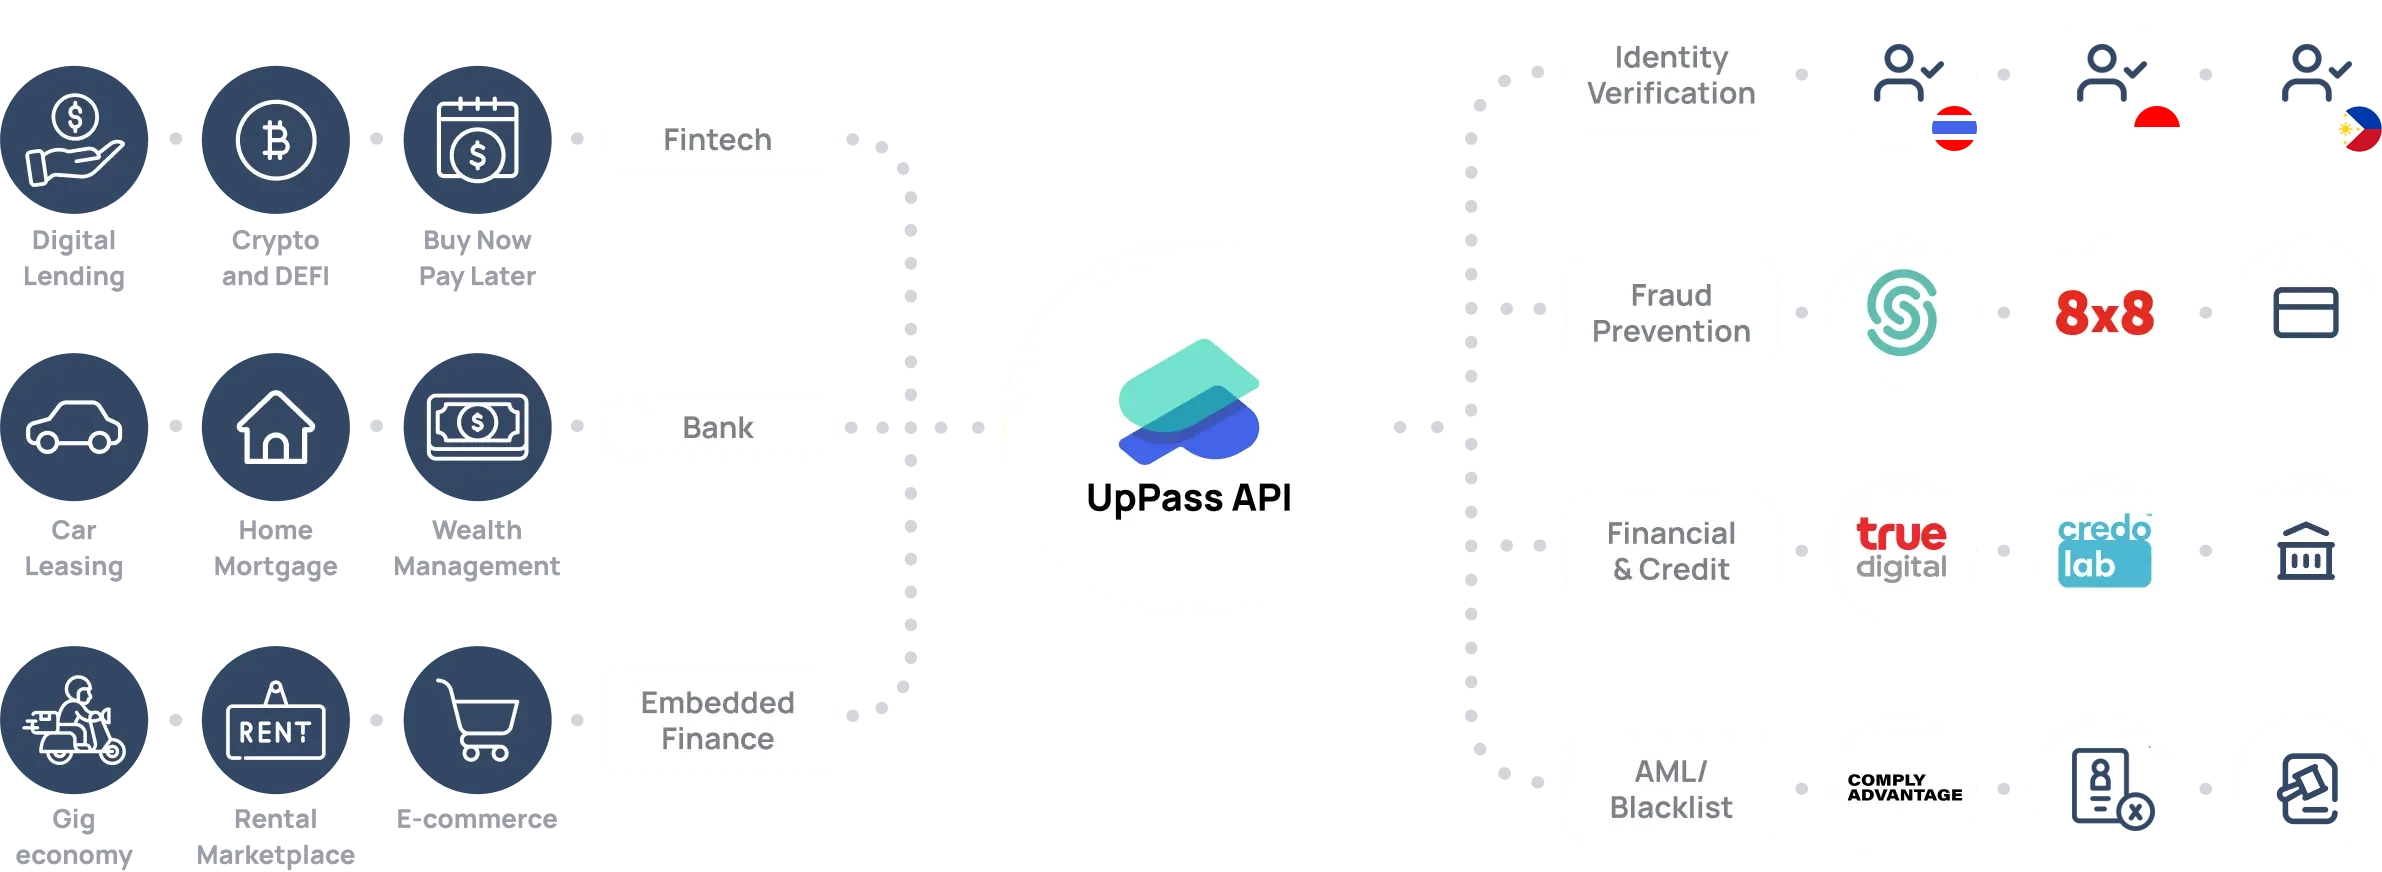 A single API that unifies verification methods, fraud tech, trusted financial and identity data in Southeast Asia.

